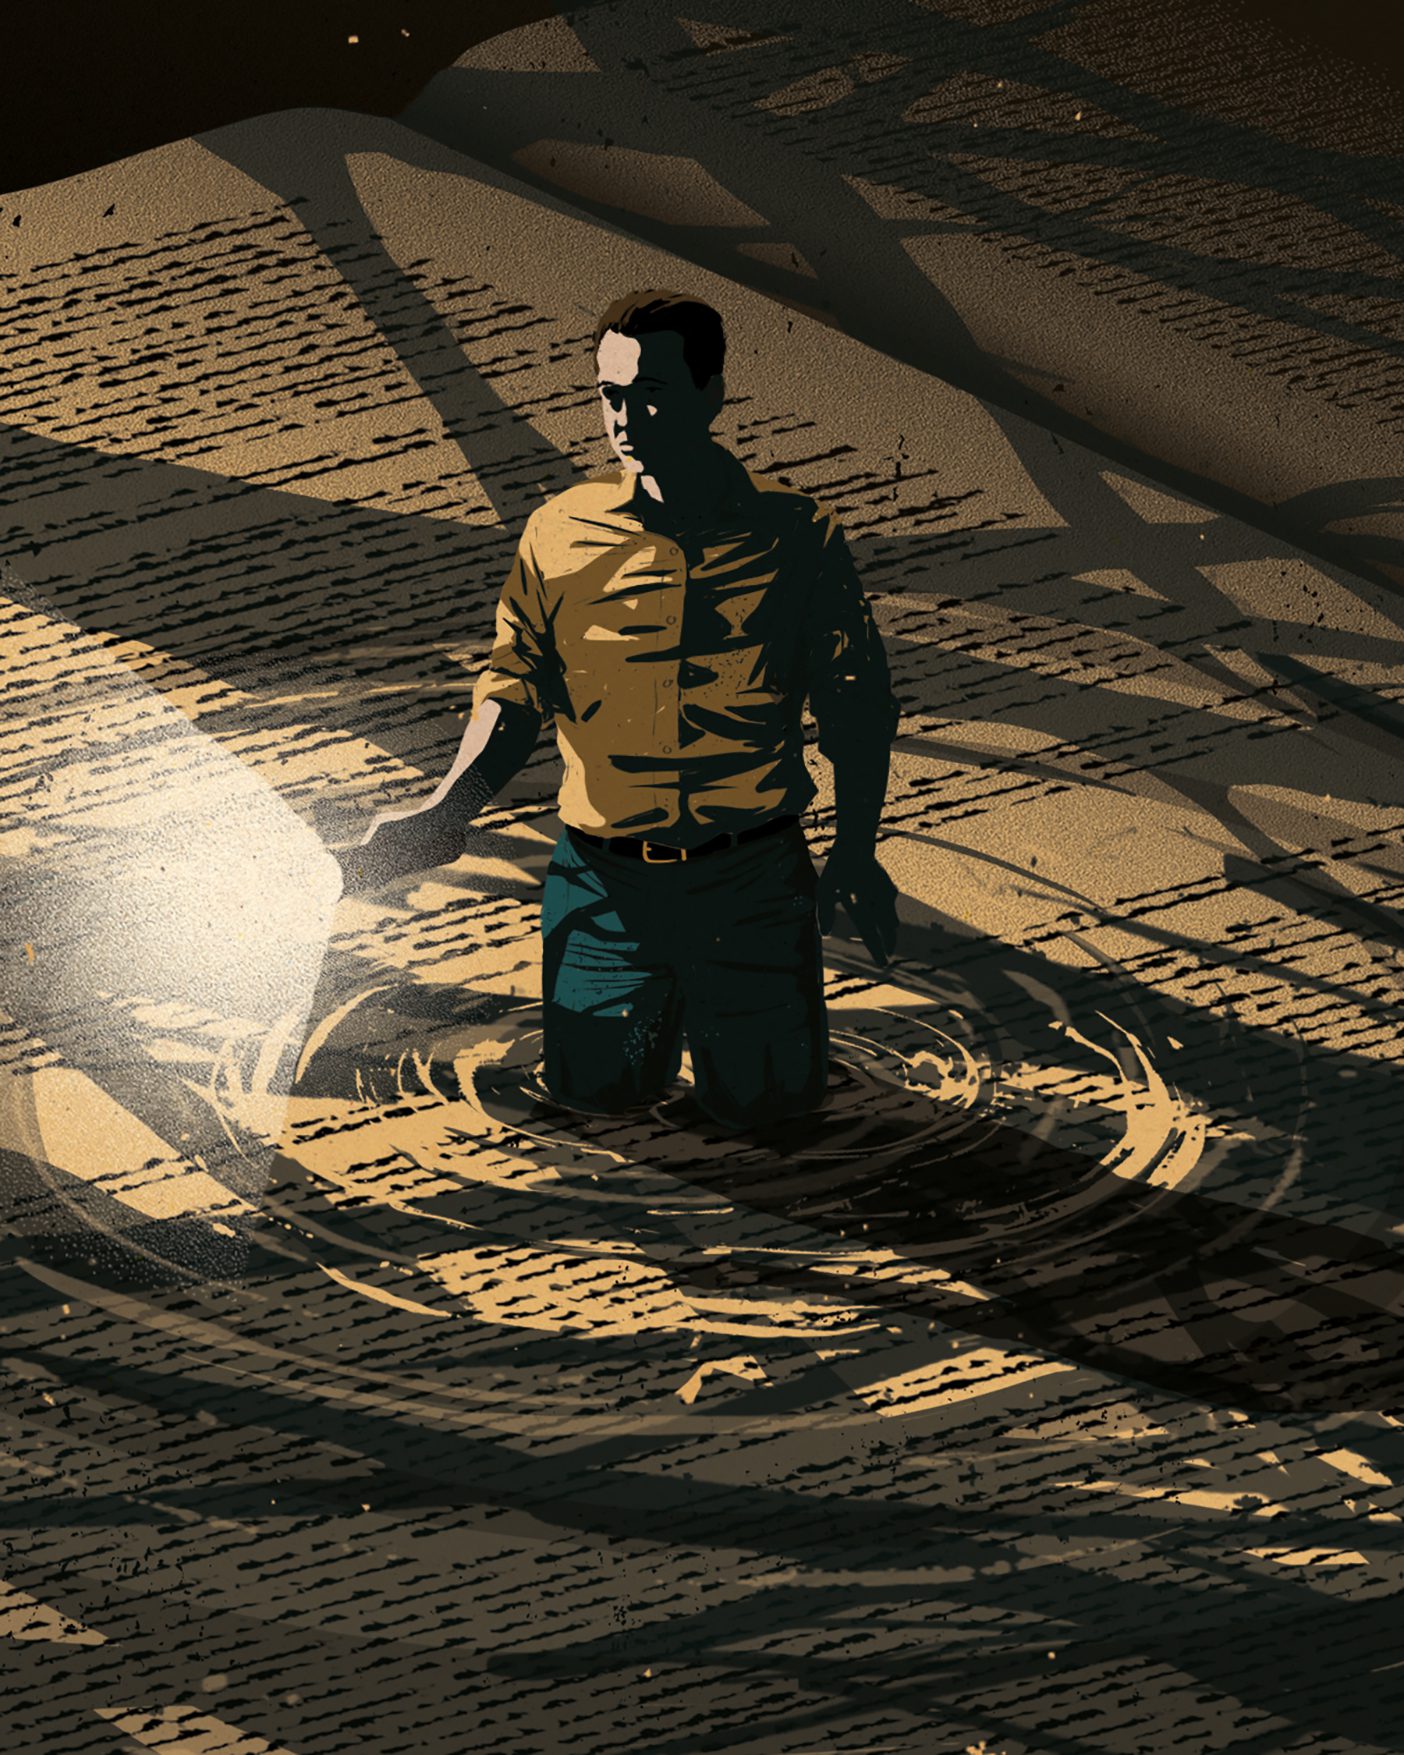 An illustration using muted colors shows a man wading through water with a flashlight. On closer look, the water is a an open book with lots of text.